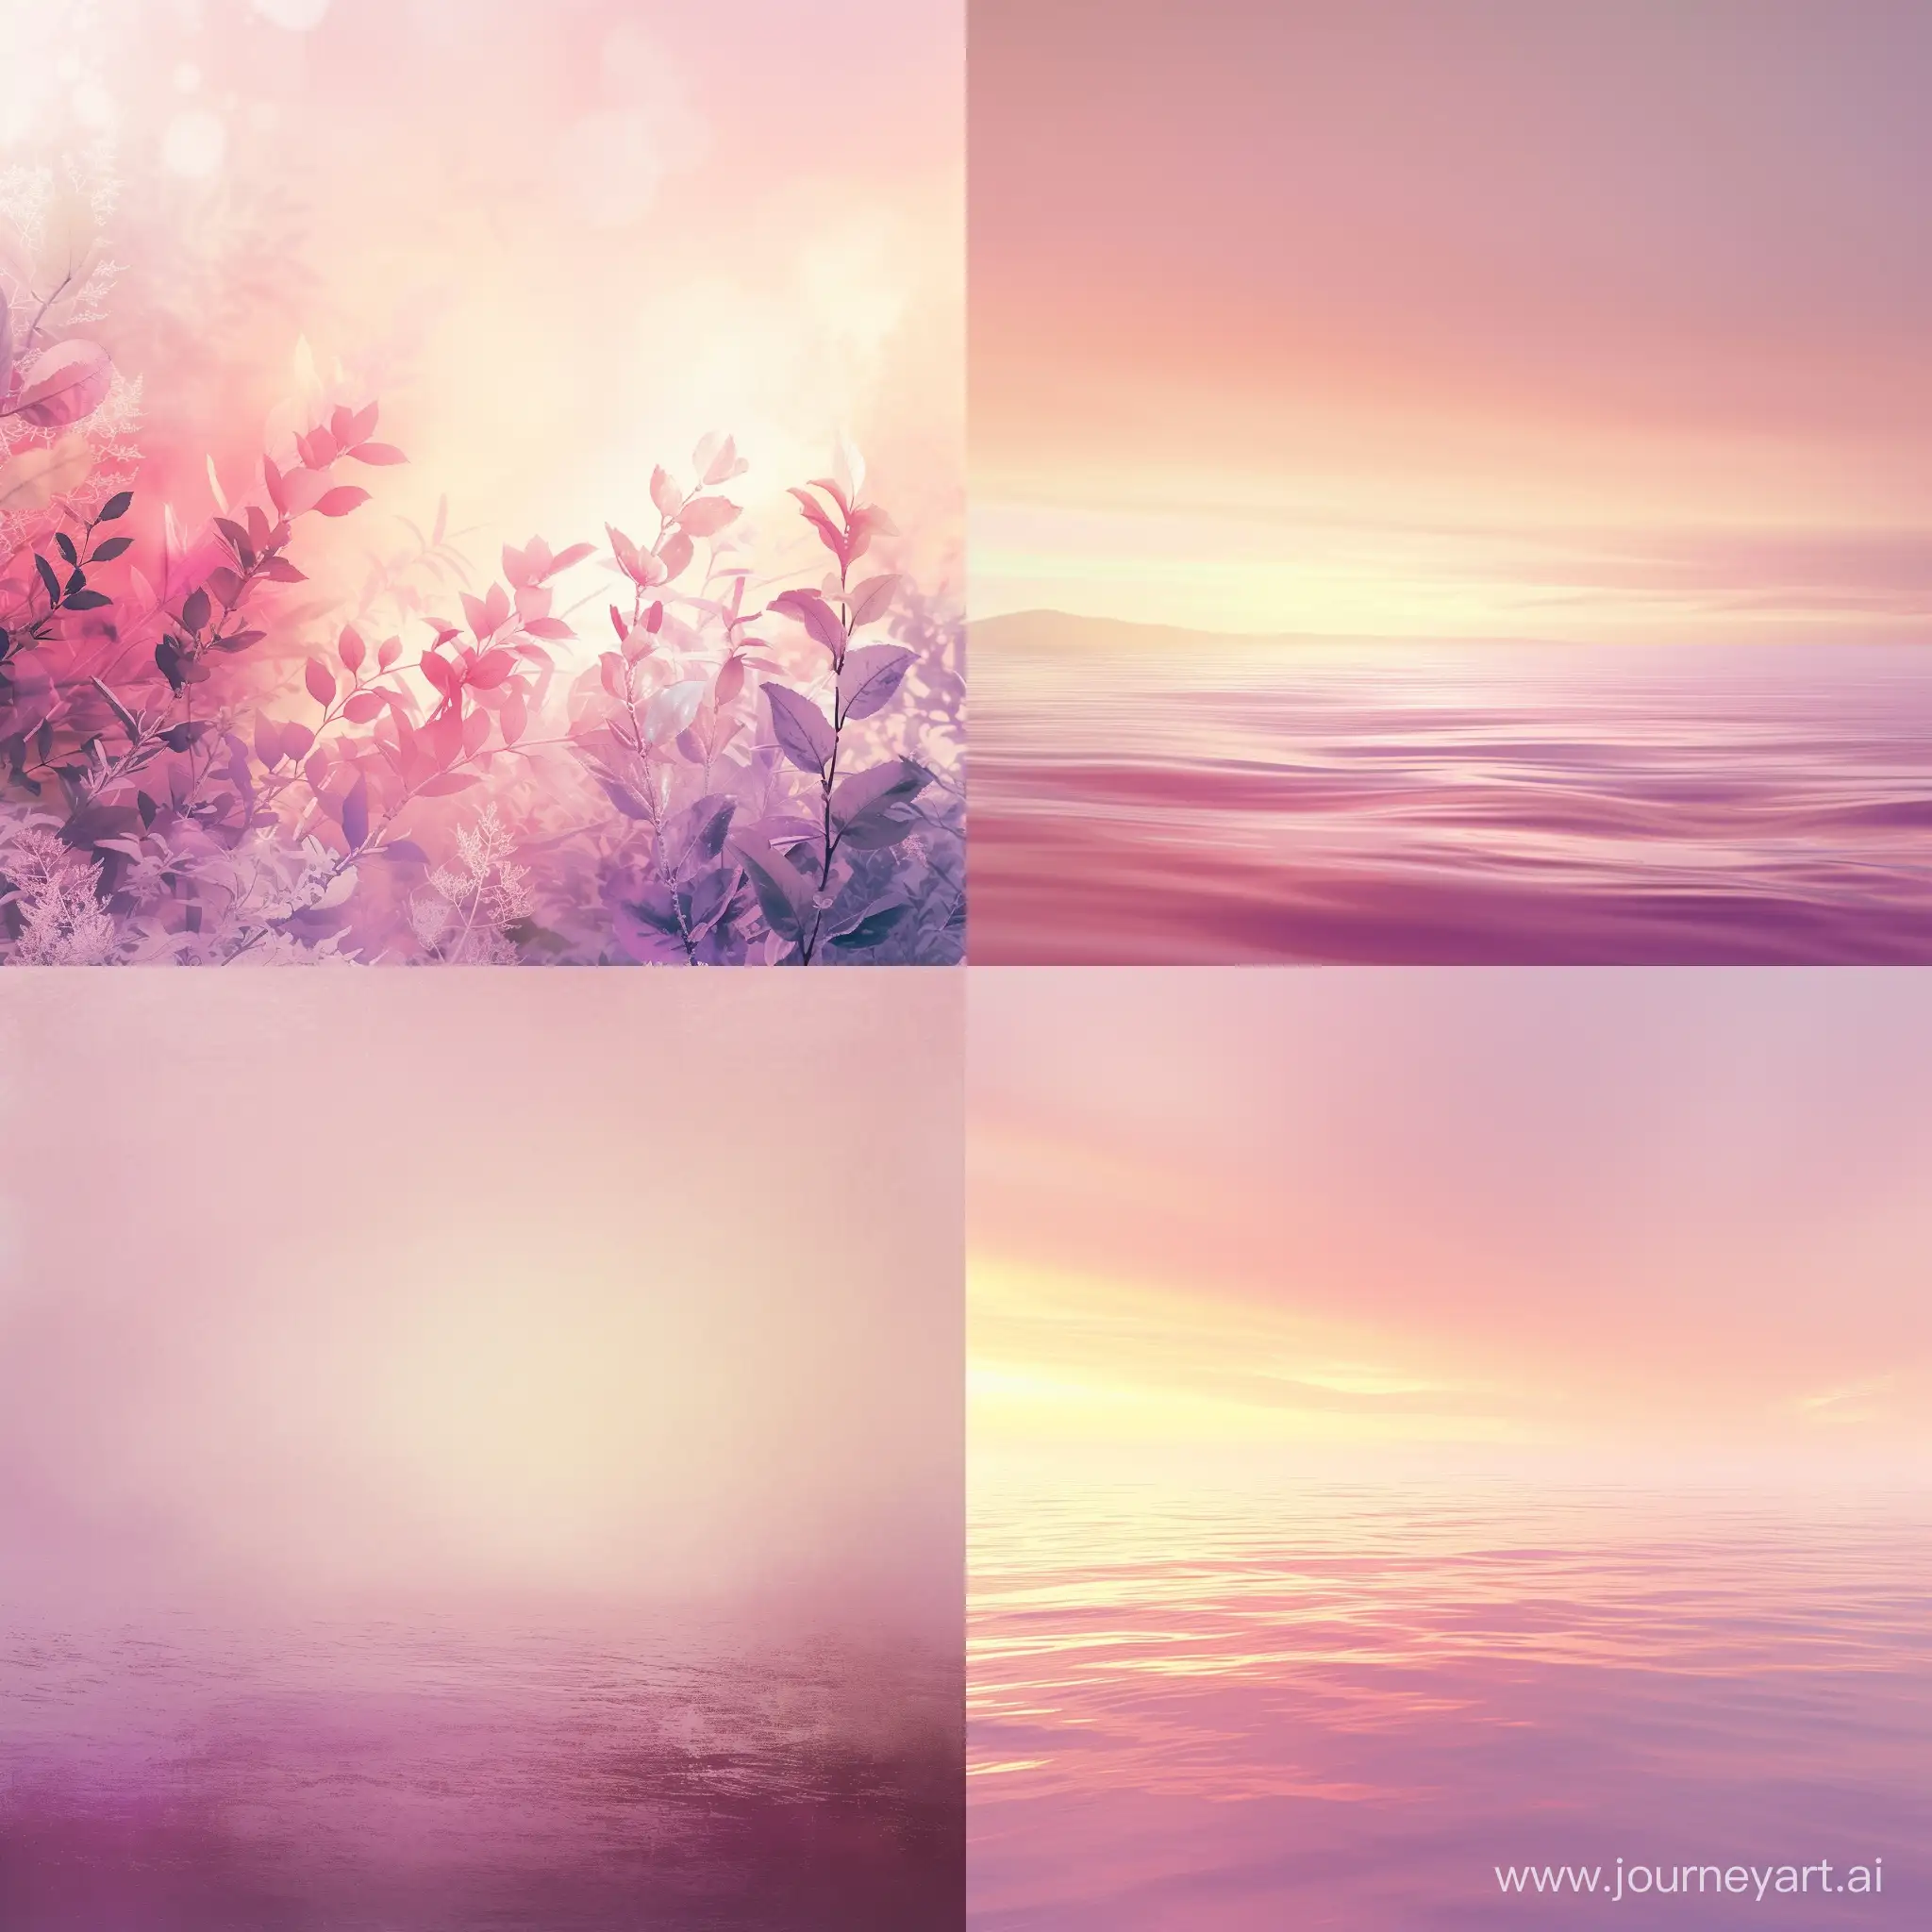 Serene-Dawn-Landscape-in-Warm-Pink-and-Lilac-Tones